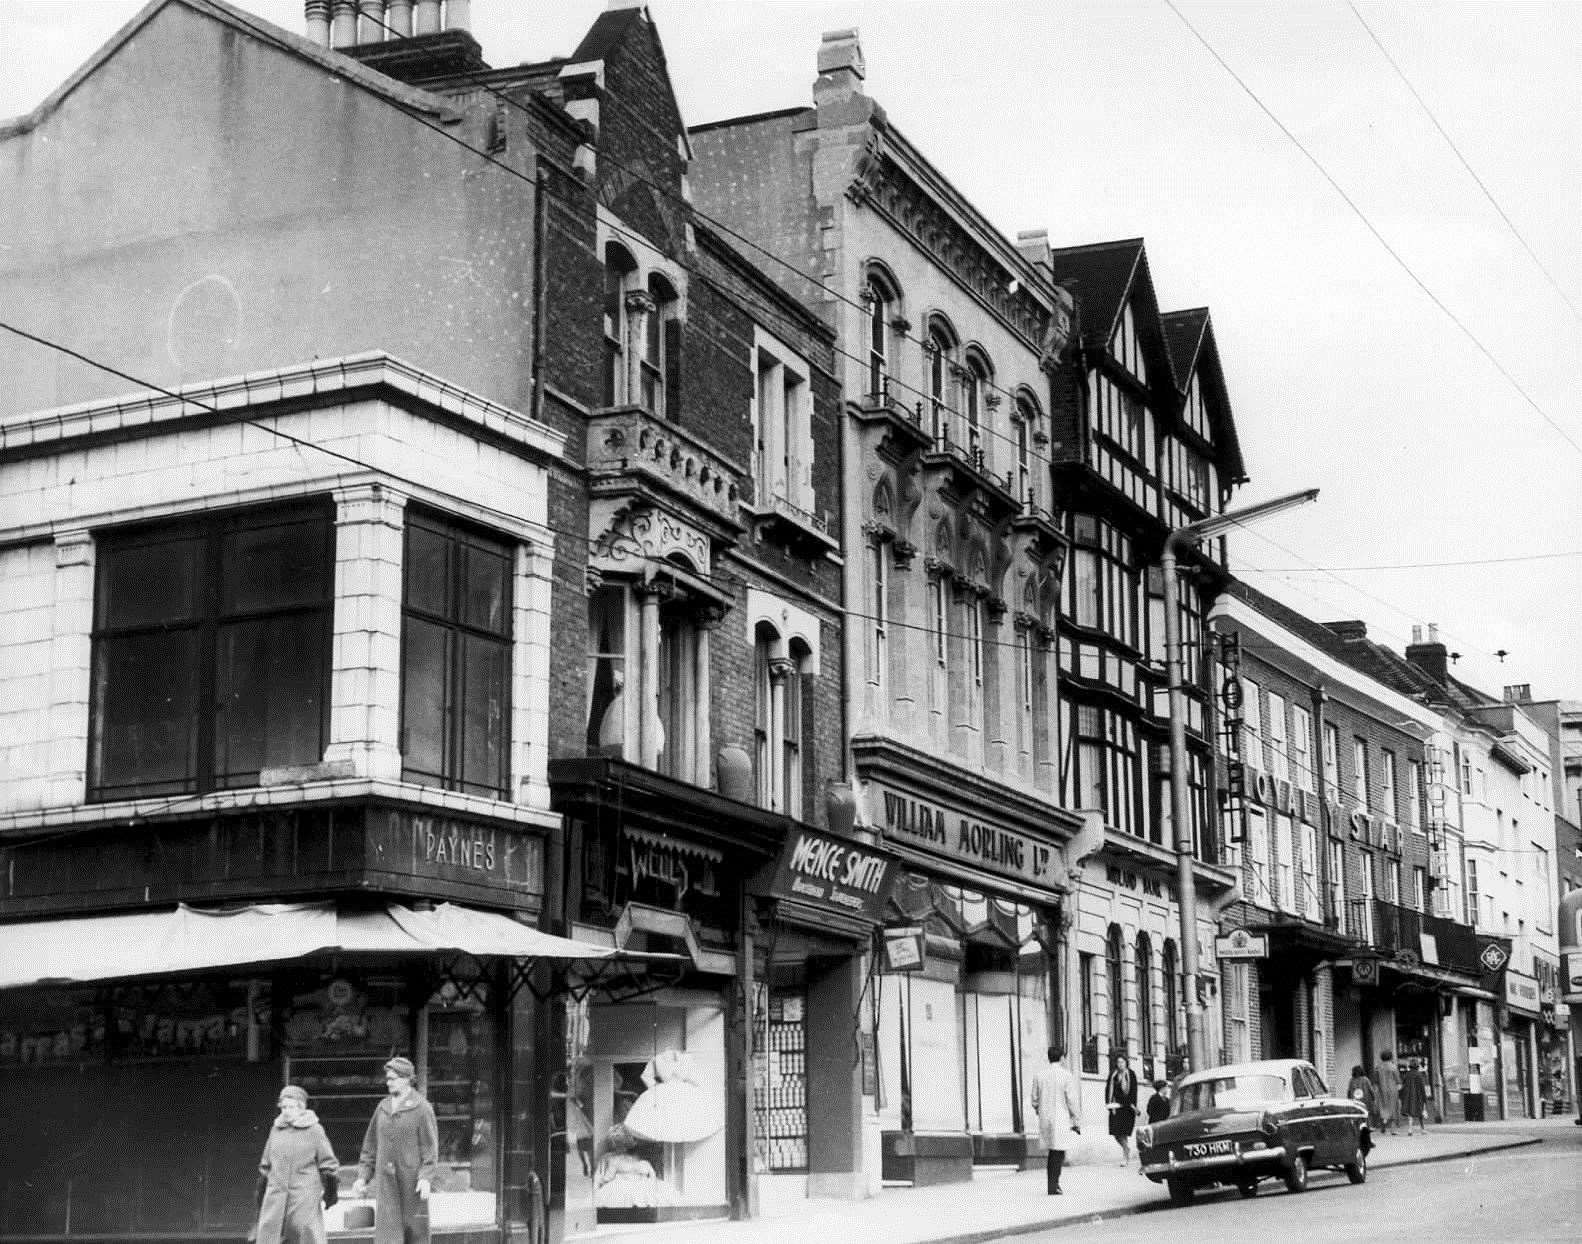 The Royal Star Hotel, Maidstone - March 1961